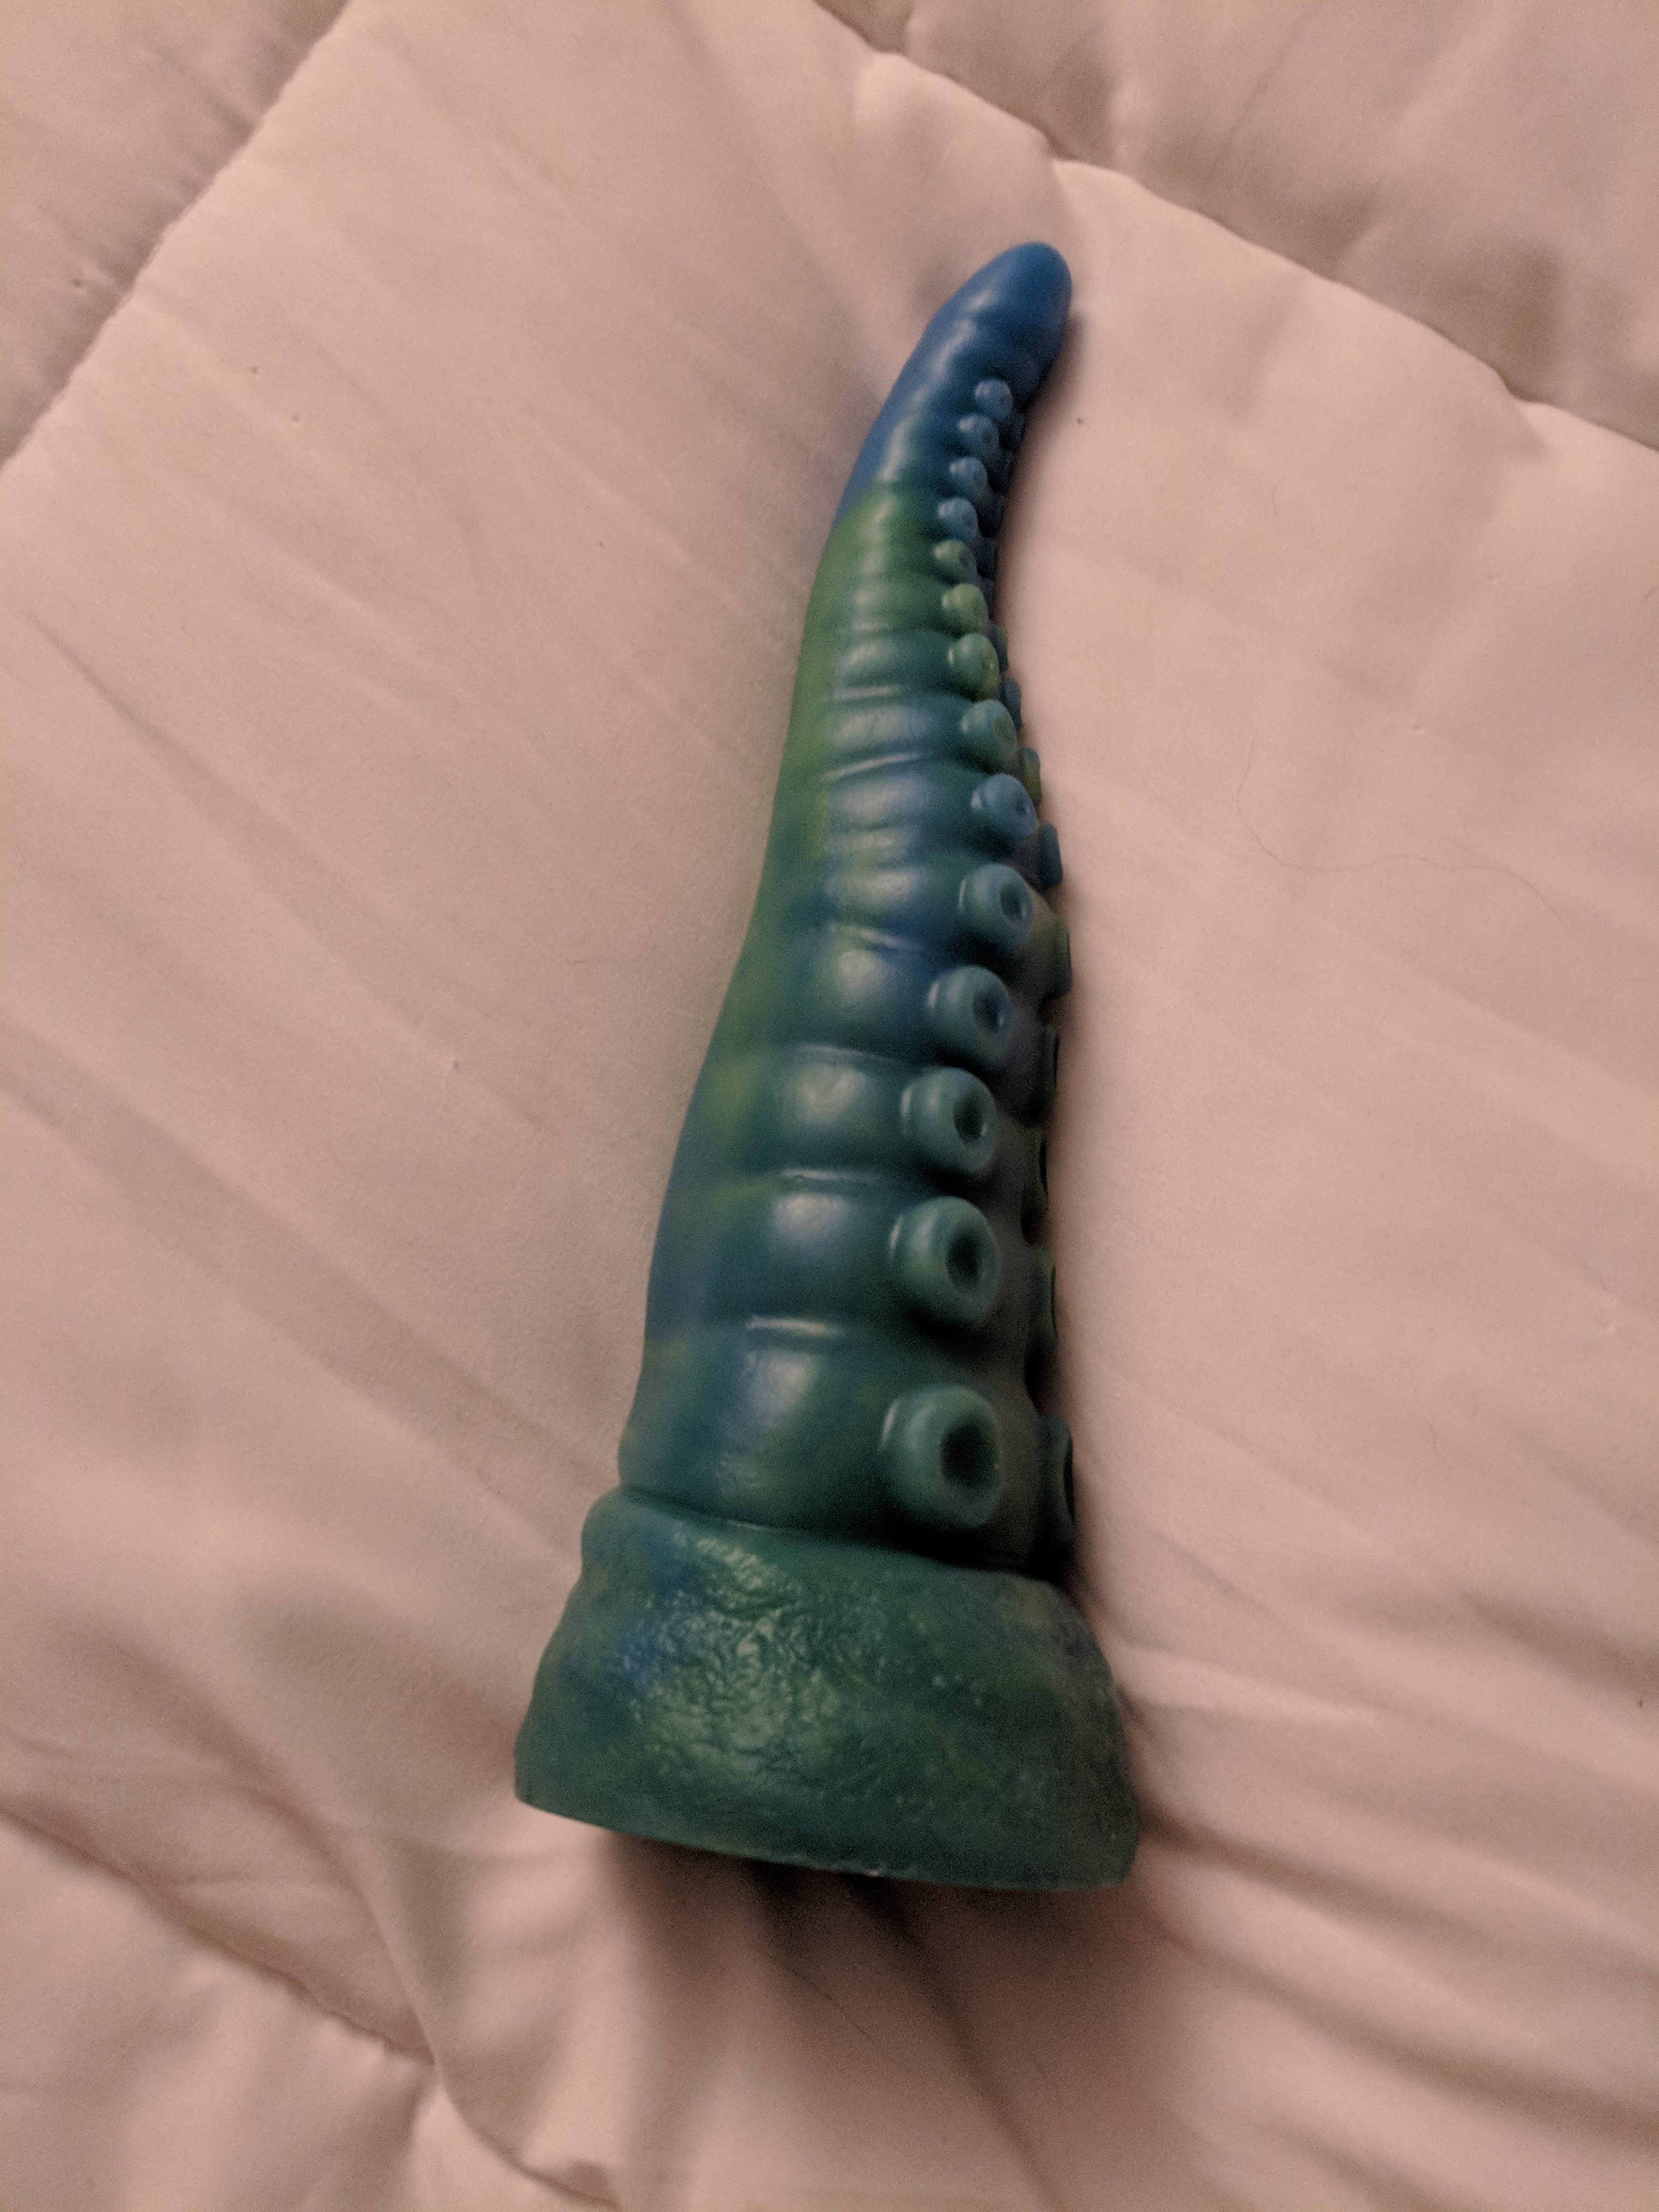 Tentacle dildo on bed, showing its tapered tip and wide base with suction cups along its length